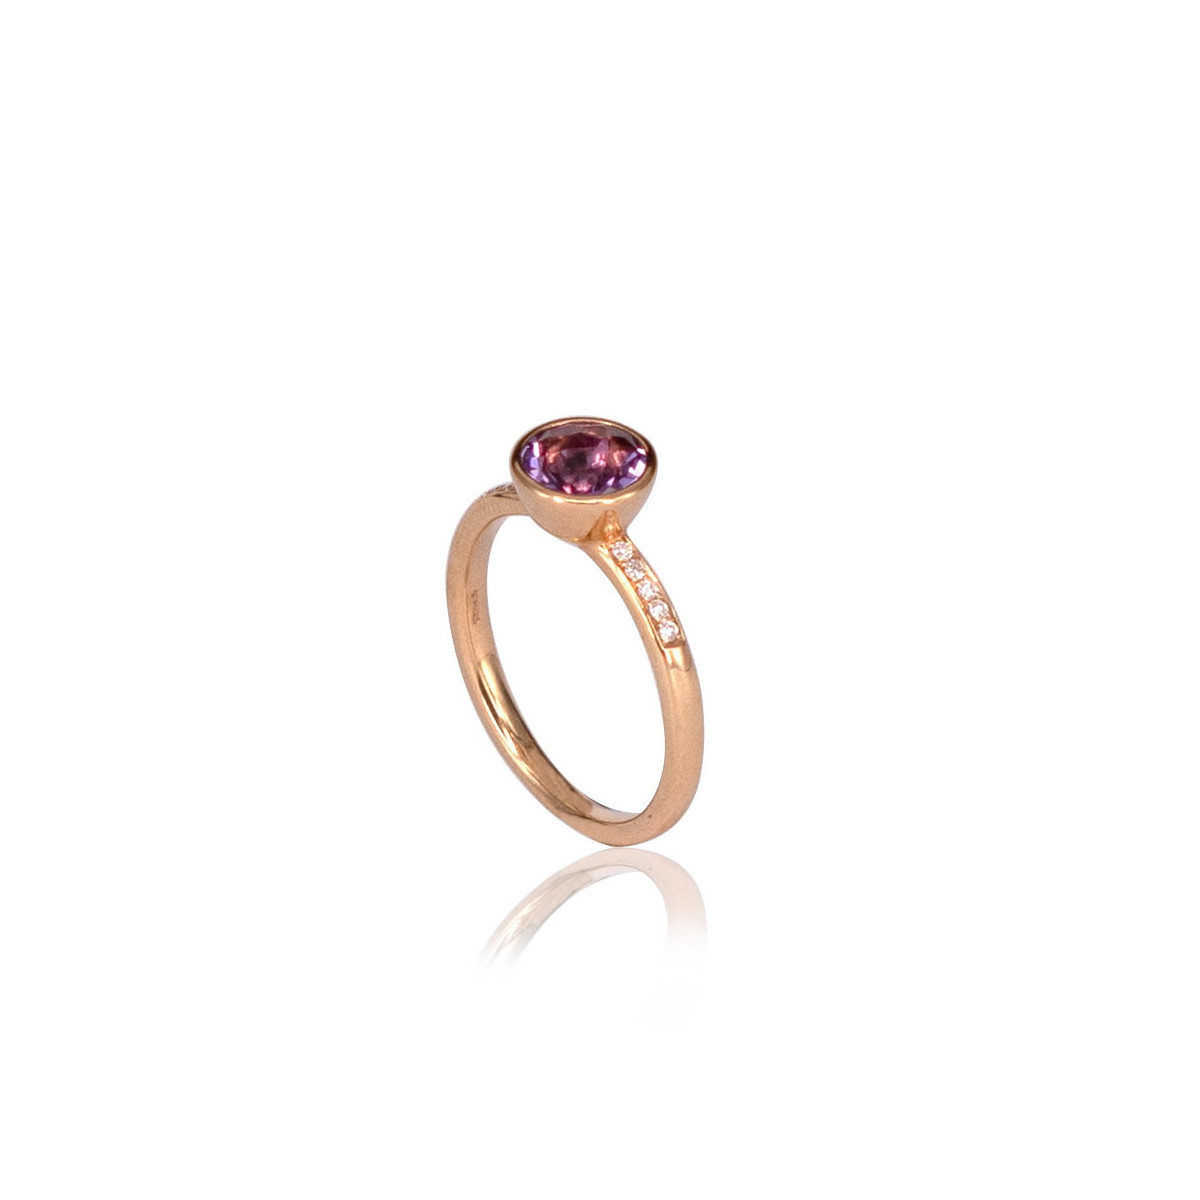 RING OF DIAMONDS WITH AMETHYST